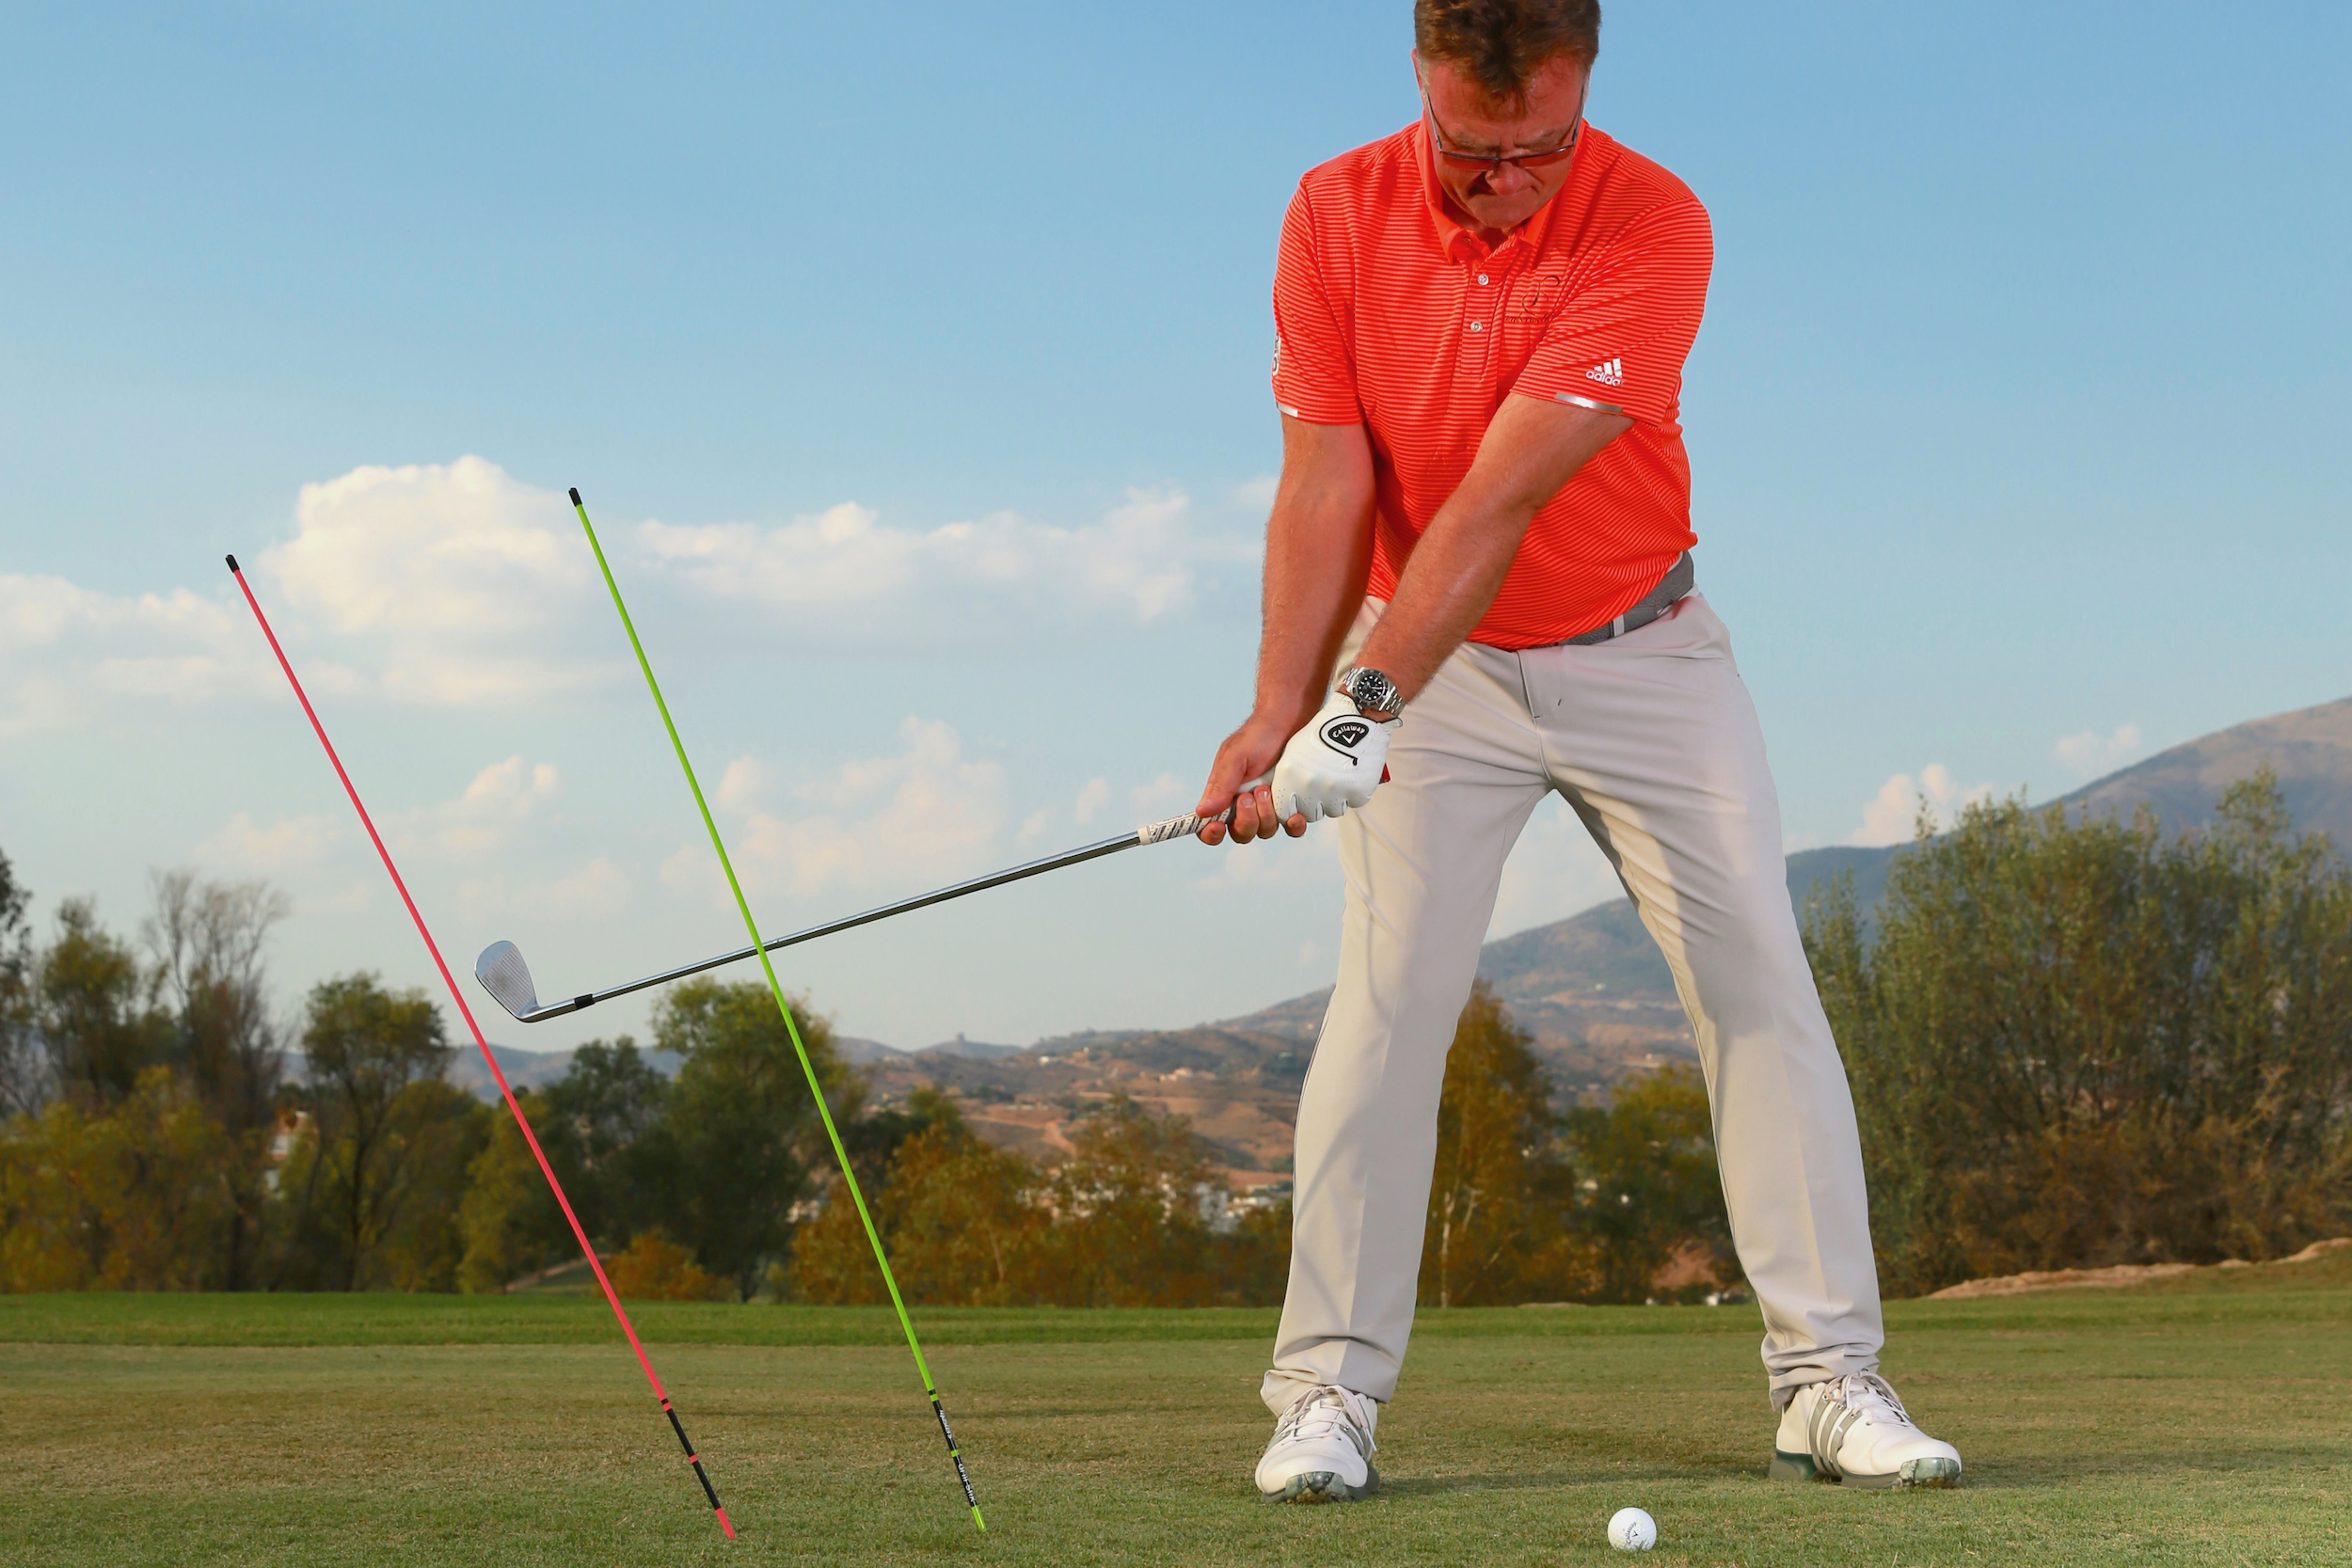 How to hit an iron - takeaway